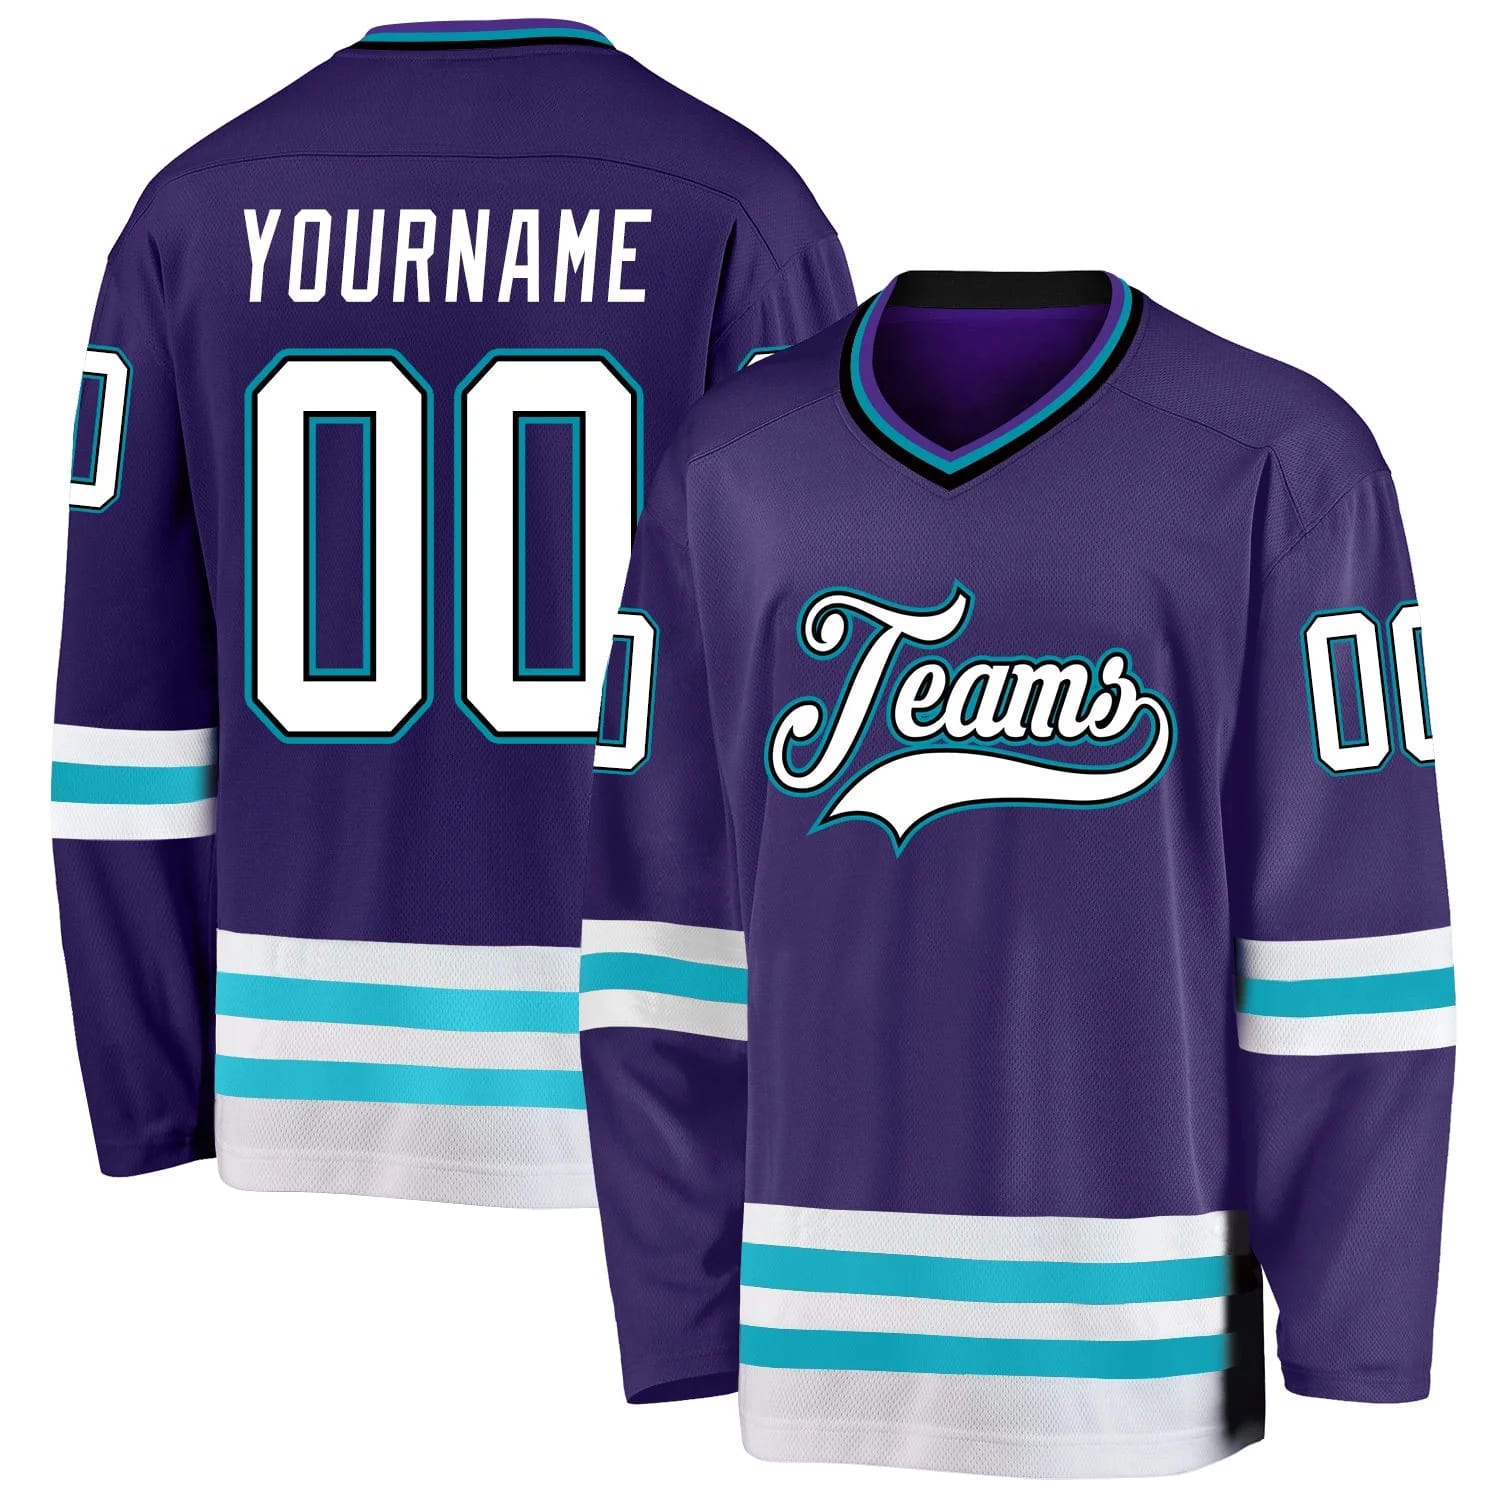 Stitched And Print Purple White-teal Hockey Jersey Custom